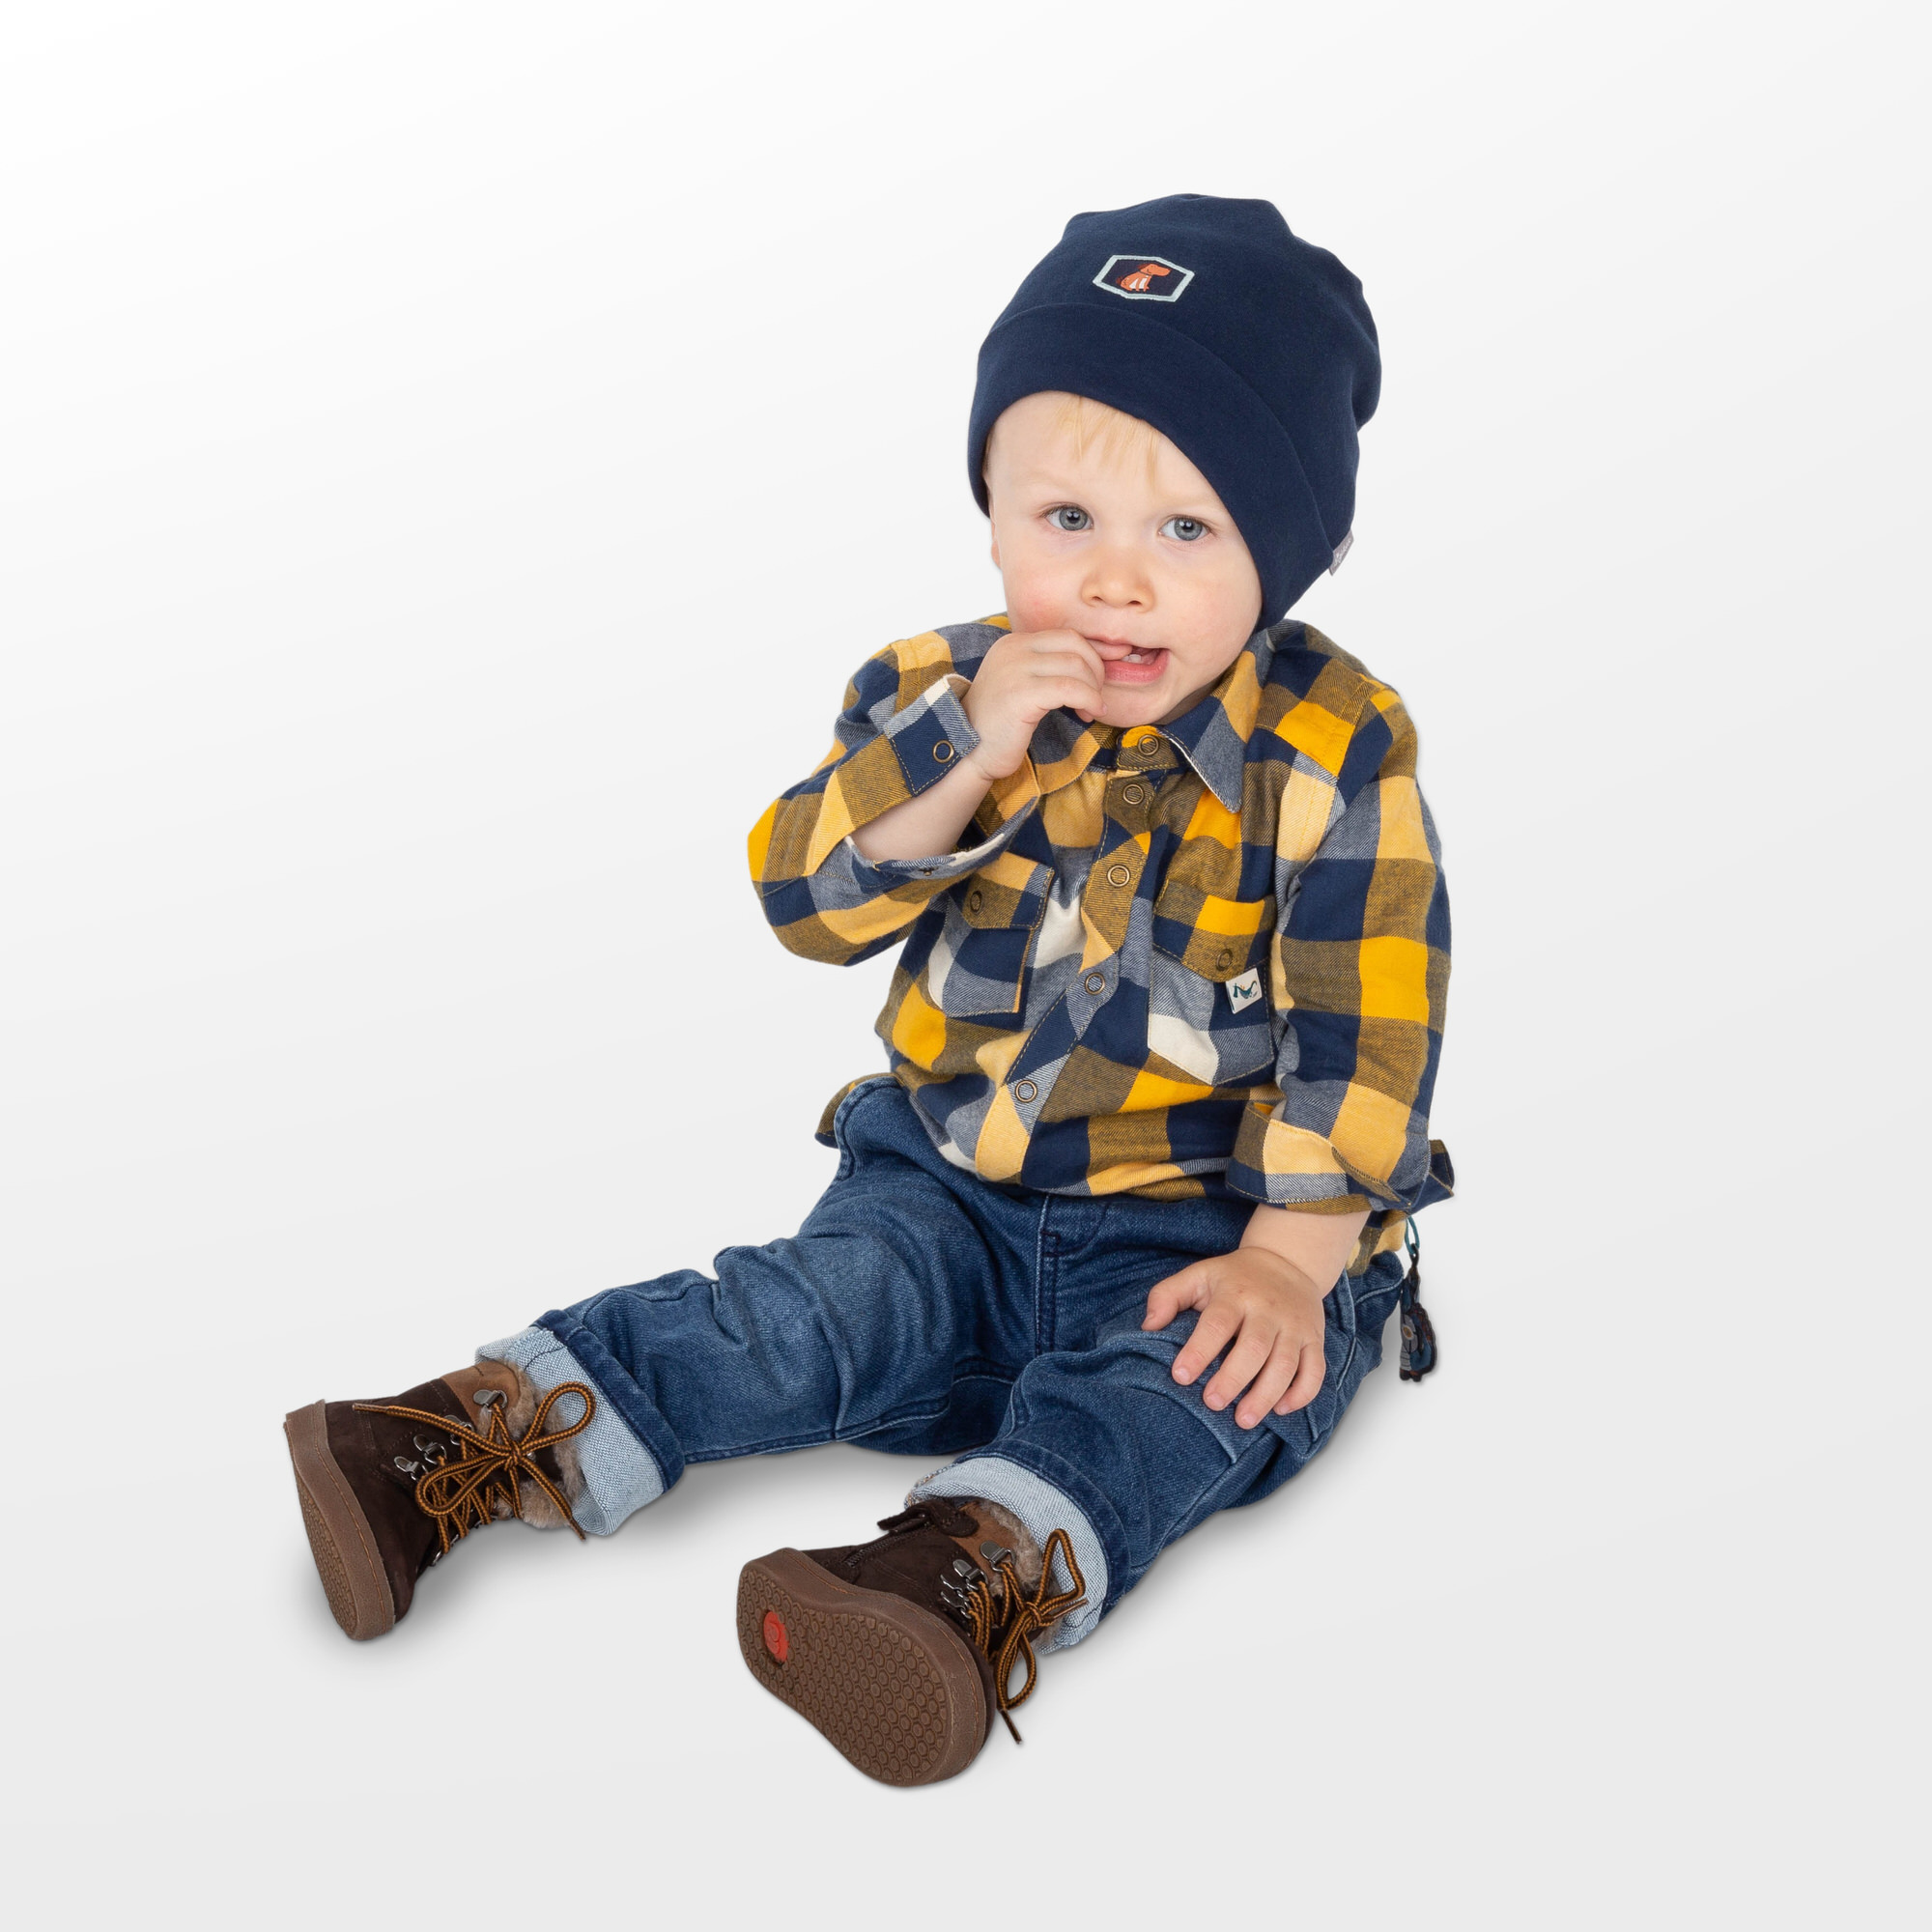 Baby Jeans with draw string, dark blue